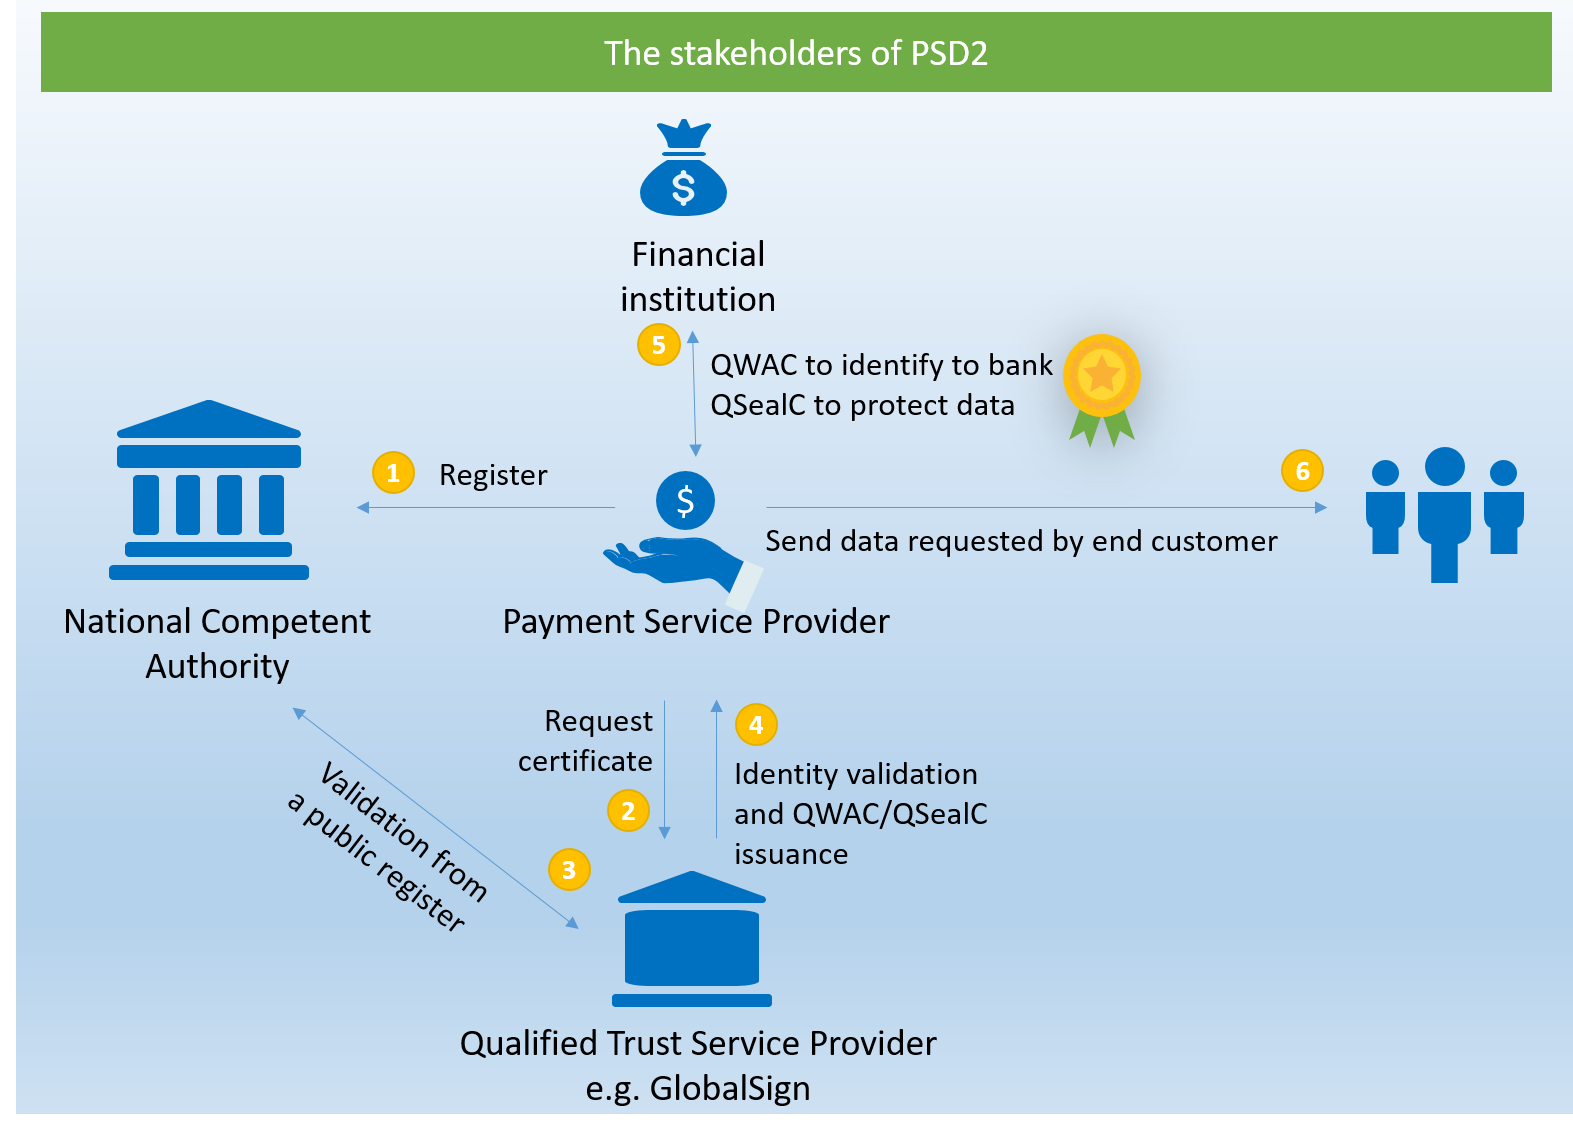 The stakeholders of PSD2